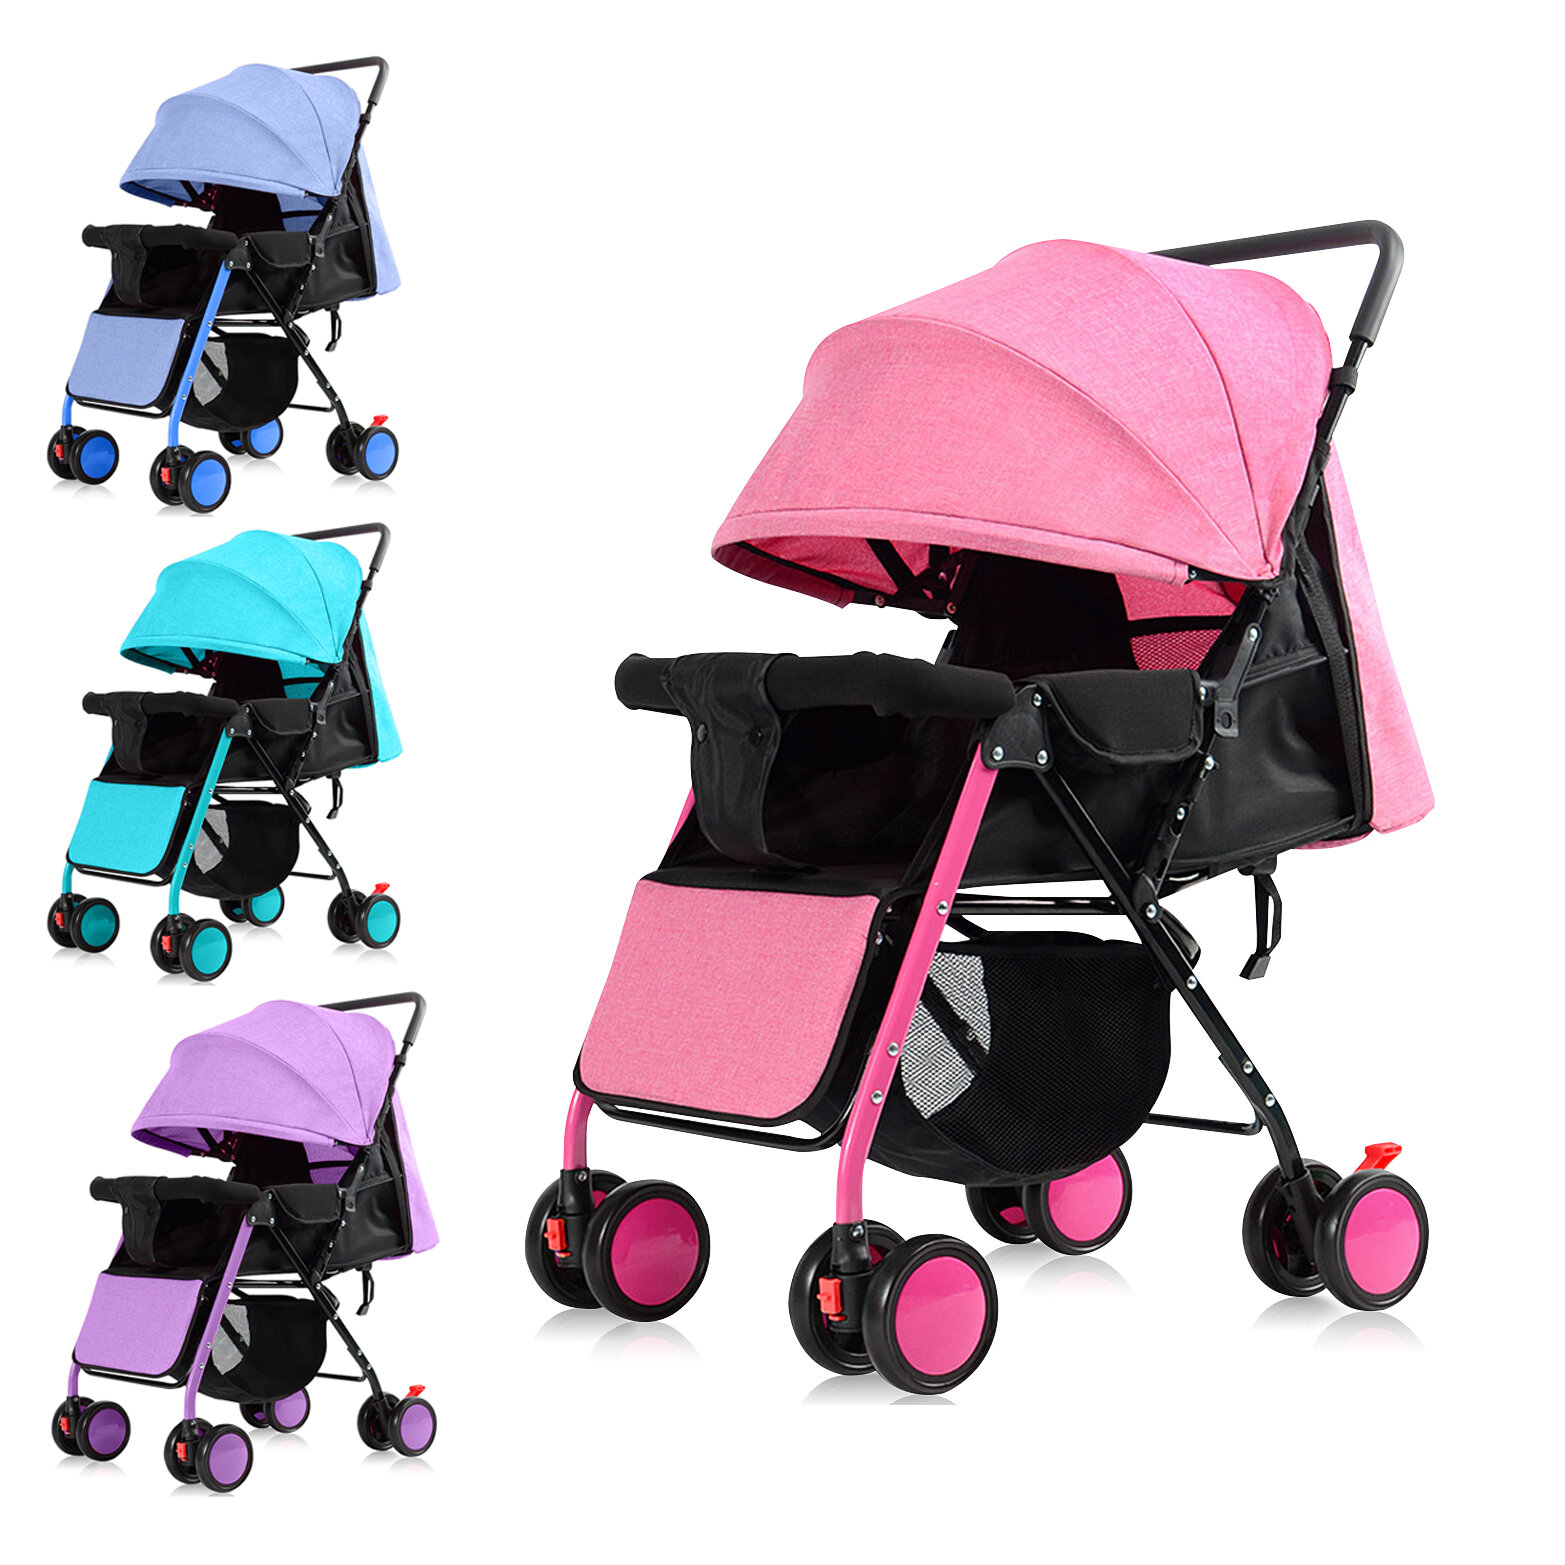 Image of Lightweight Shake-proof Baby Stroller With Adjustable Pedal Folding Portable Baby Carriage Trolley For 0-3 Years Old